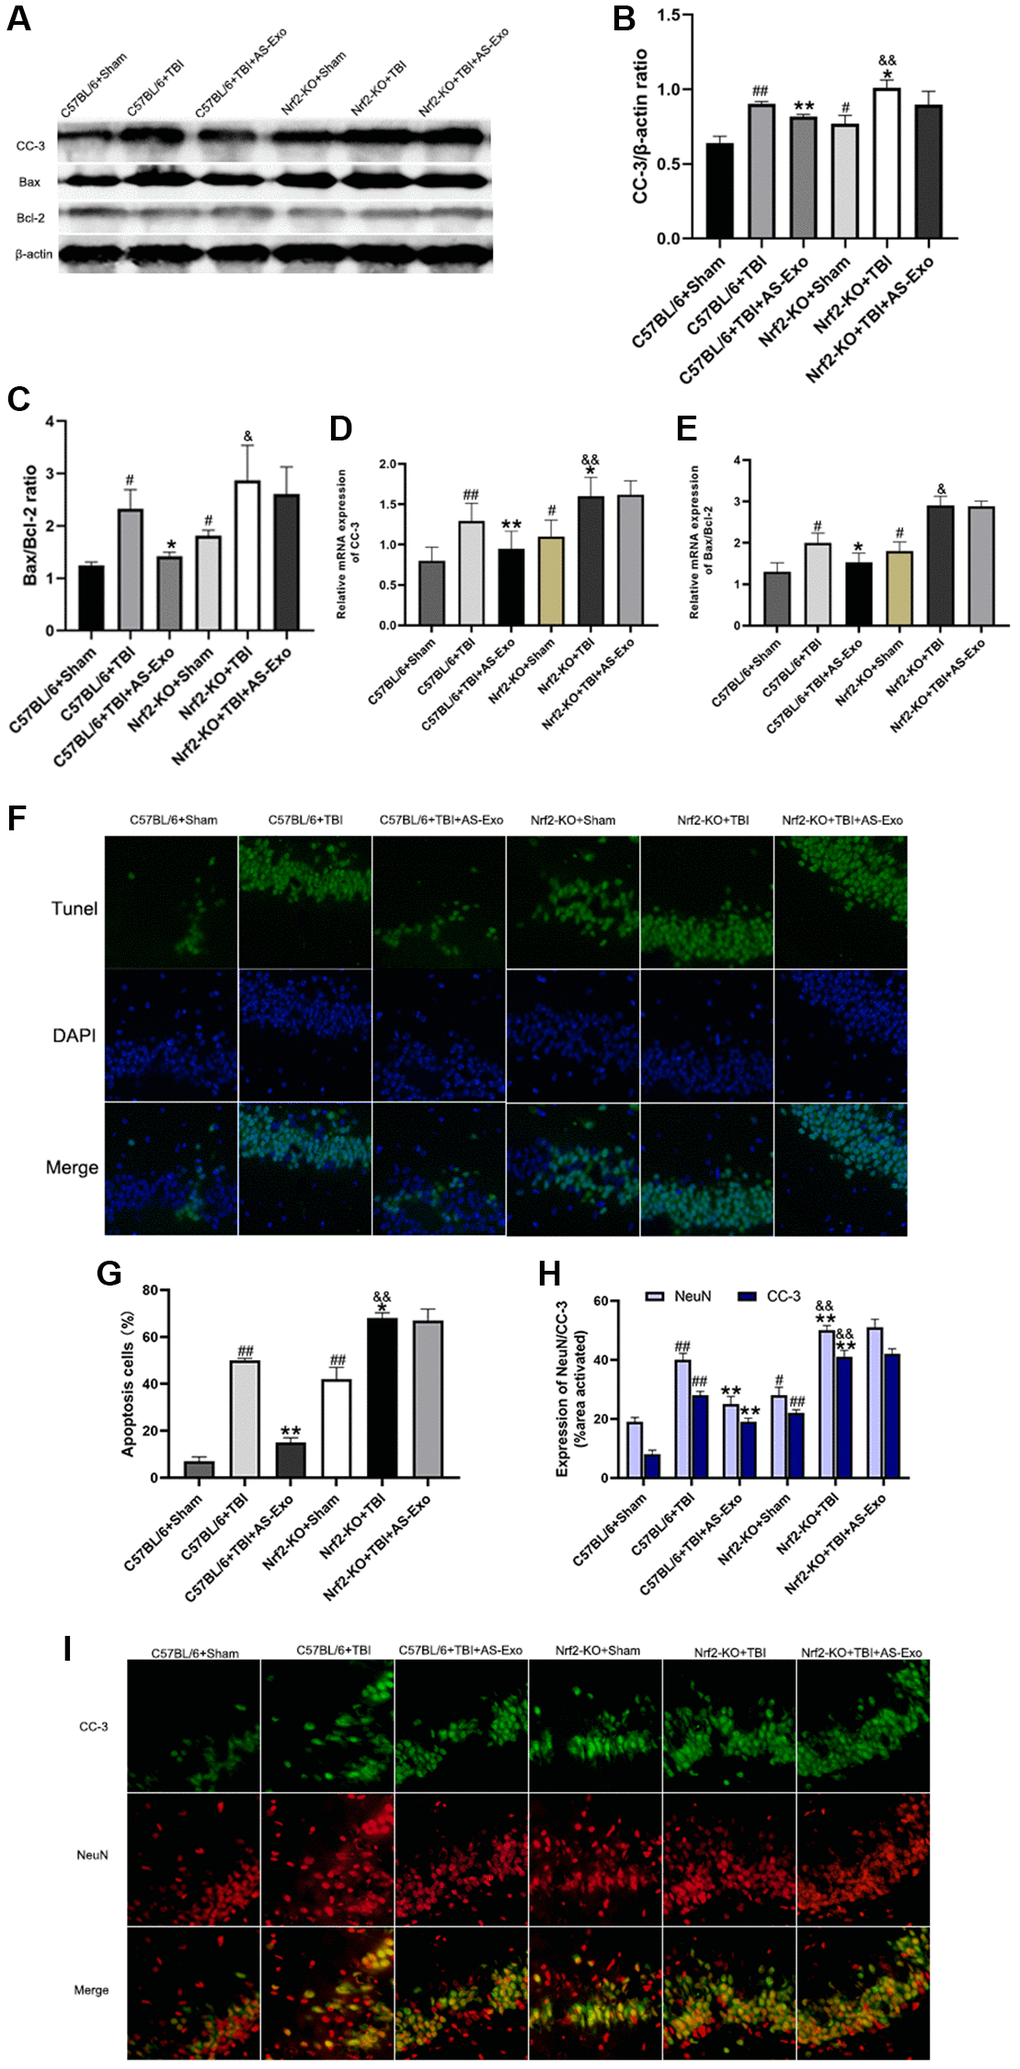 AS-Exos decrease TBI-induced neuronal apoptosis by activating Nrf2. (A) Western blot analysis shows expression levels of CC-3 and ratio of Bax/Bcl-2 proteins in the hippocampus of mice groups at 48 h following TBI or Sham surgery. (B–C) Bar graphs show (B) CC-3 protein expression levels and (C) ratio of Bax/Bcl-2 proteins normalized to β-actin. (D–E) Bar graphs show the (D) CC-3 mRNA expression levels and (E) ratio of Bax/Bcl-2 mRNAs relative to β-actin mRNA levels in the hippocampus tissues of the mice groups. (F) Representative confocal images show TUNEL (green) and DAPI (blue) staining of hippocampus tissue sections from the mice groups. (G) Bar graph shows the relative percentage of apoptotic neuronal cells in the hippocampus tissues from various mice groups. (H) MATLAB software analysis shows the staining intensities for NeuN and CC-3 in the hippocampus tissues of various mice groups. (I) Representative images show double immunofluorescence staining of NeuN (red) and CC-3 (green) in the hippocampus tissues of various mice groups. (Scale bar, 100 μm). Data are represented as means ± SD (n = 5 per group). #P ##P *P **P &P &&P 